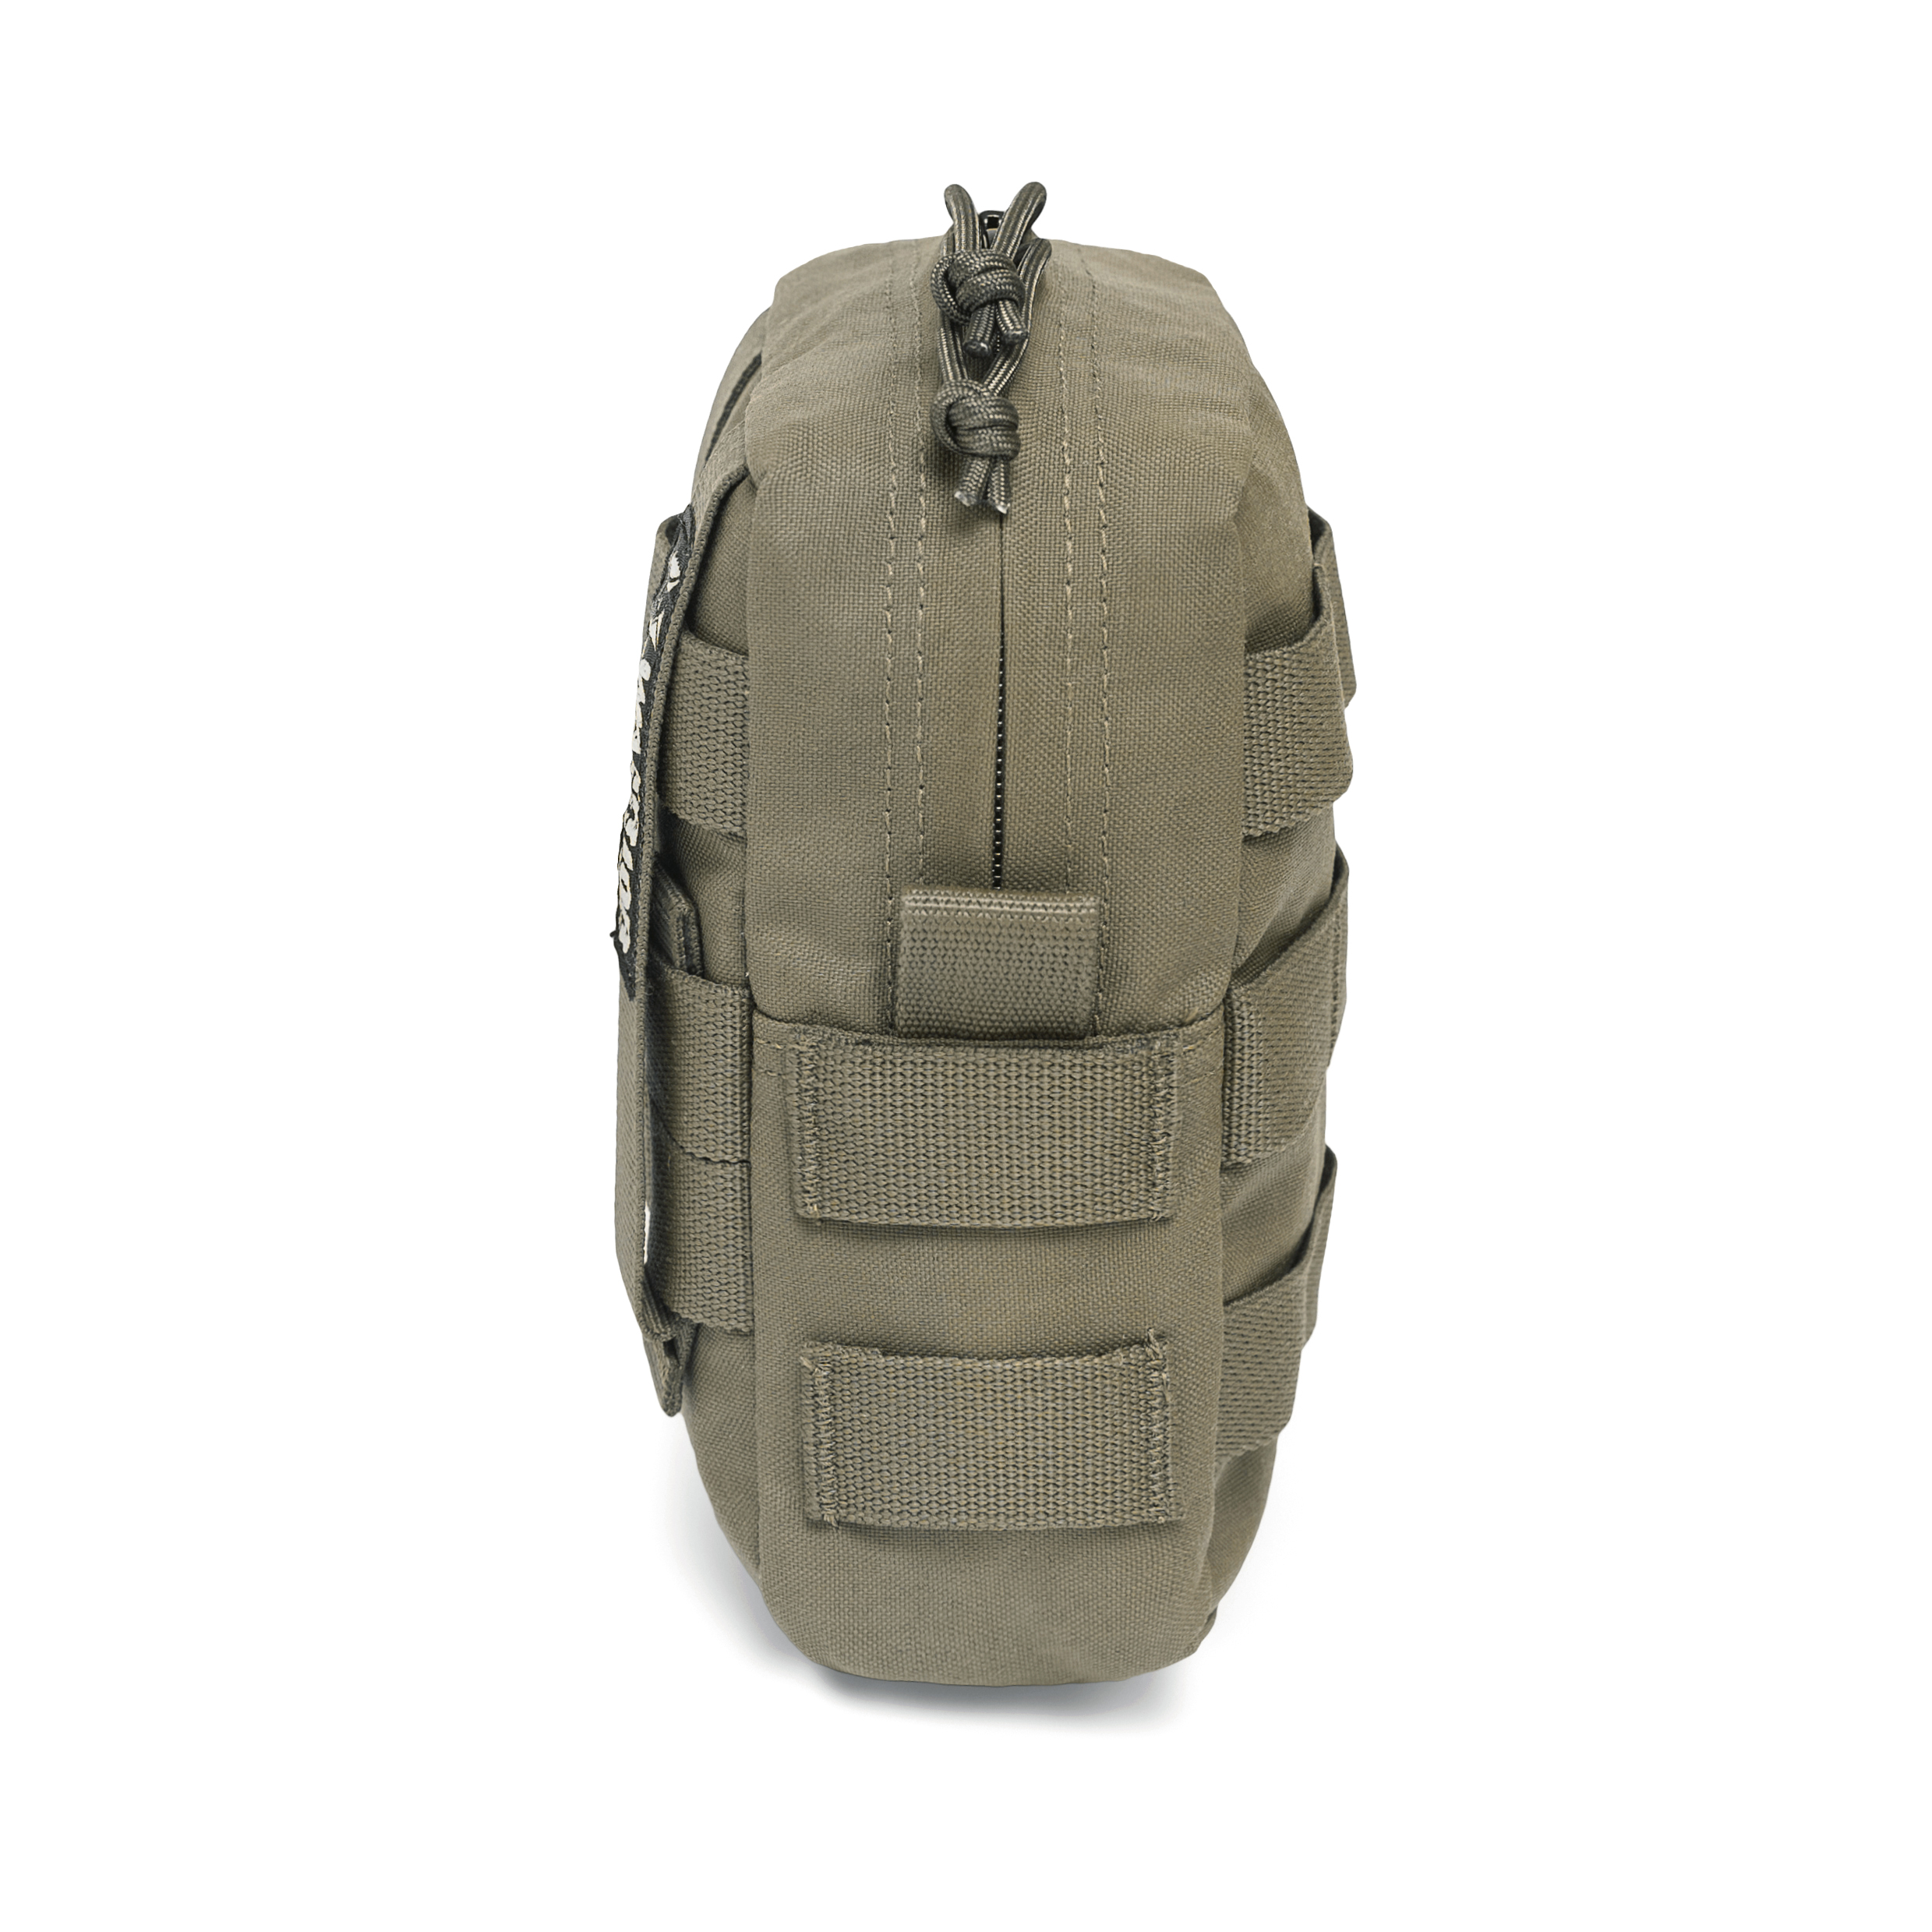 Warrior Small Molle Utility Pouch - Ranger Green